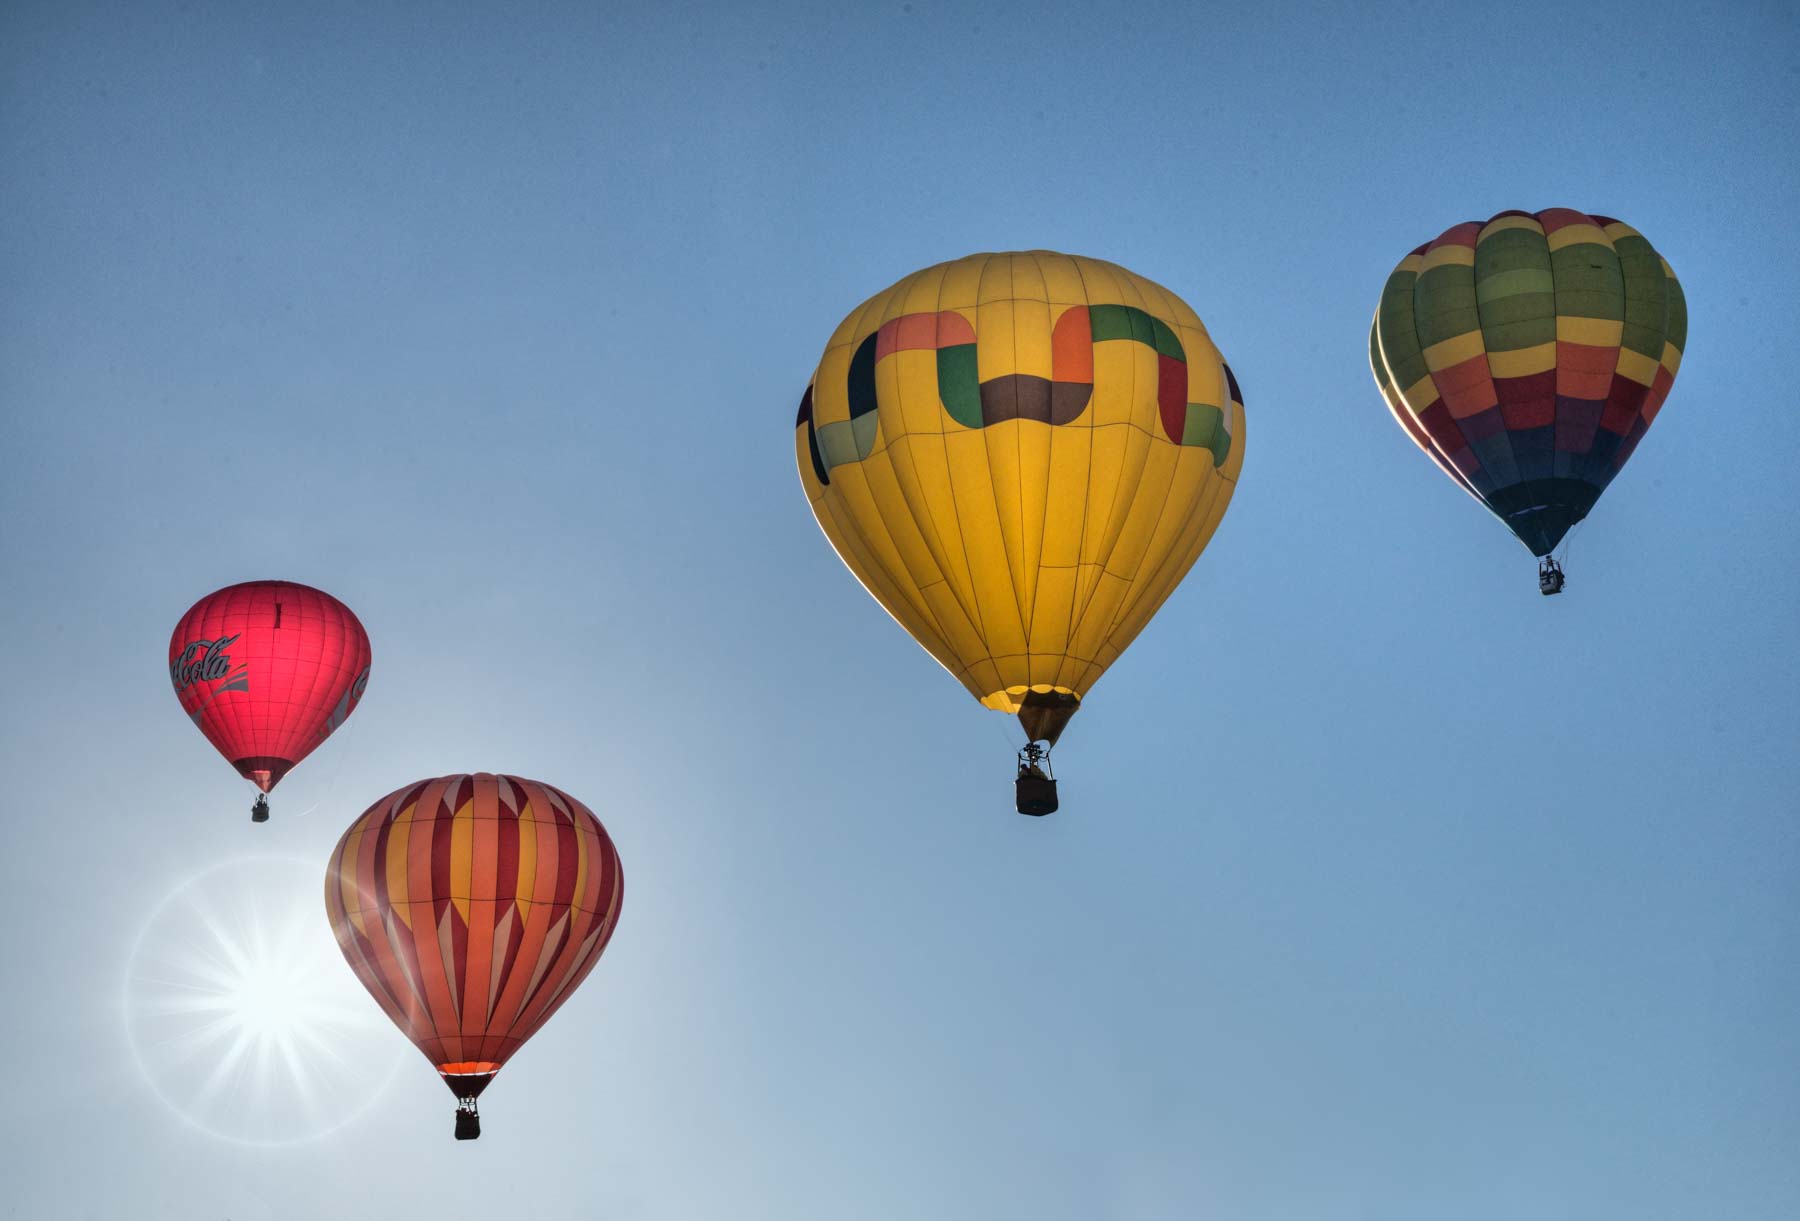 Backlit balloons in flight at the Page Balloon Regatta